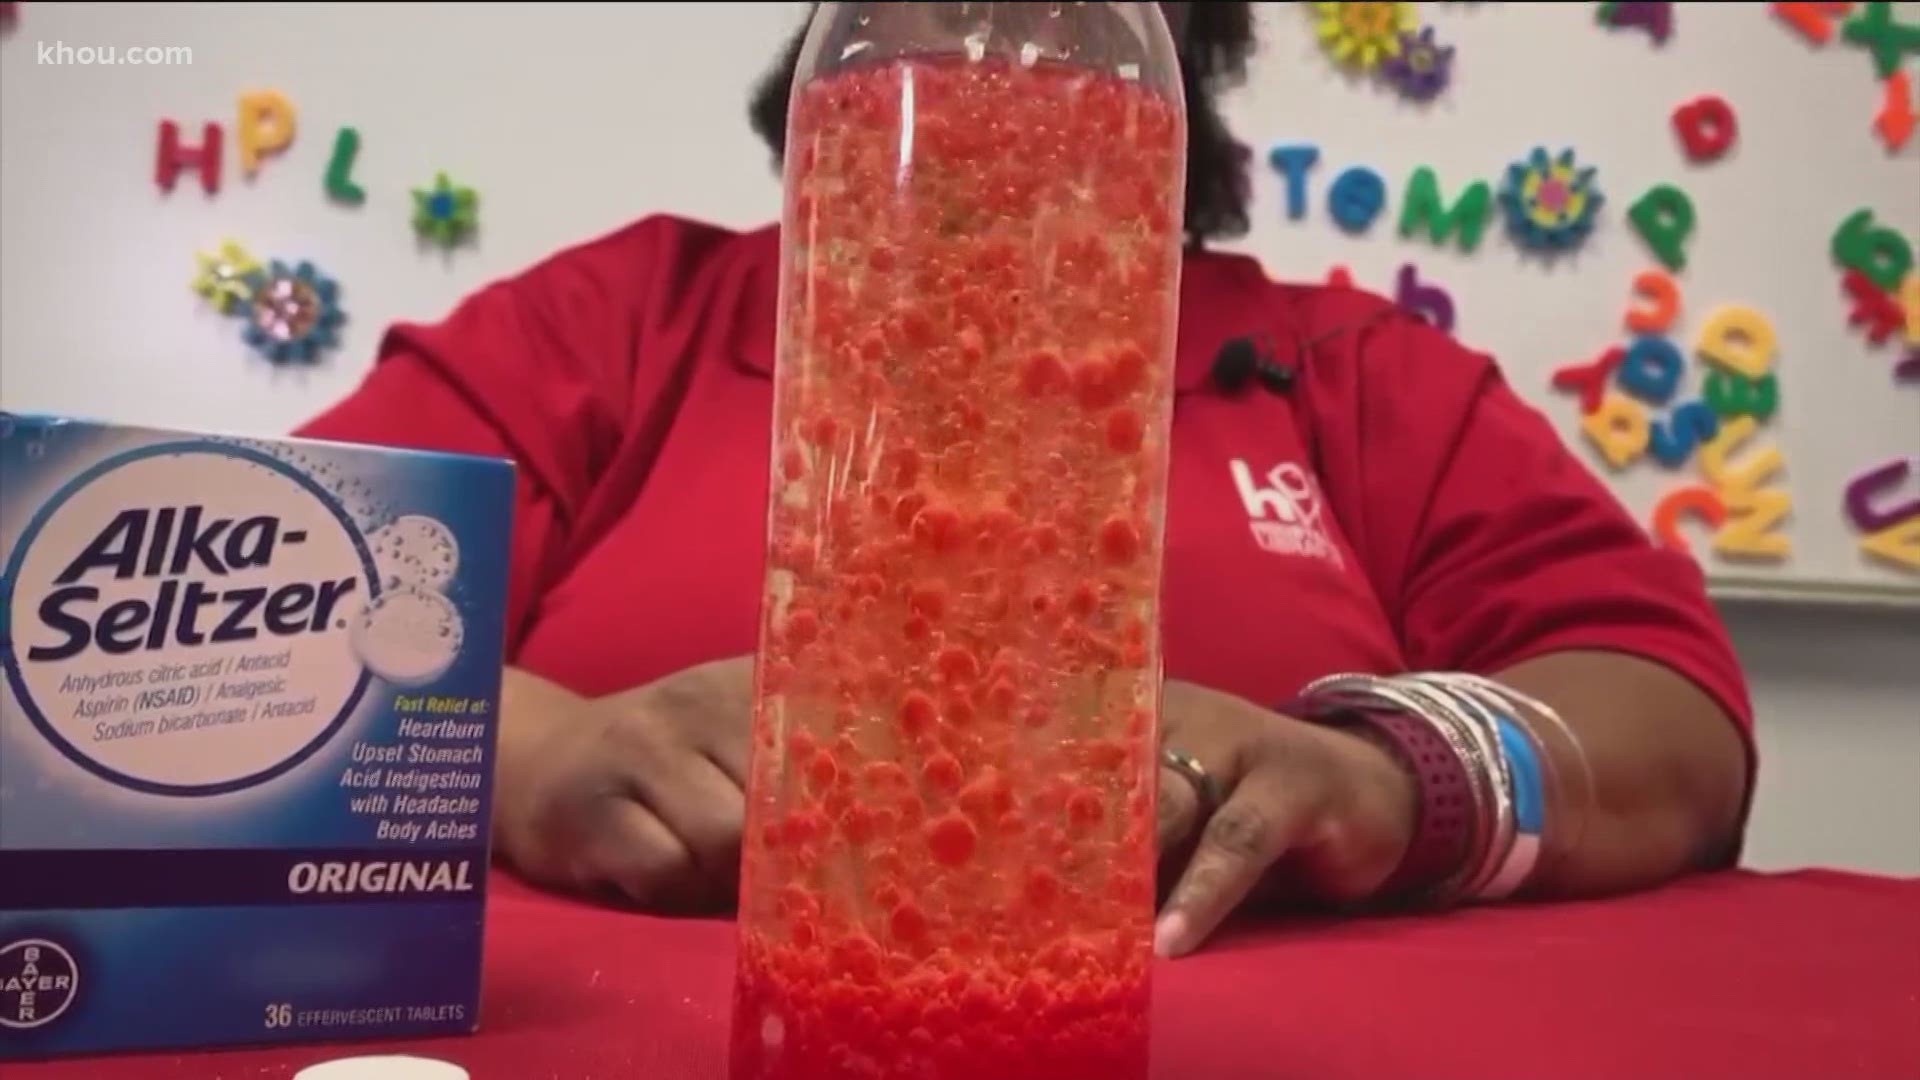 HPL Liftoff to Learning: STEM- How to make a homemade lava lamp